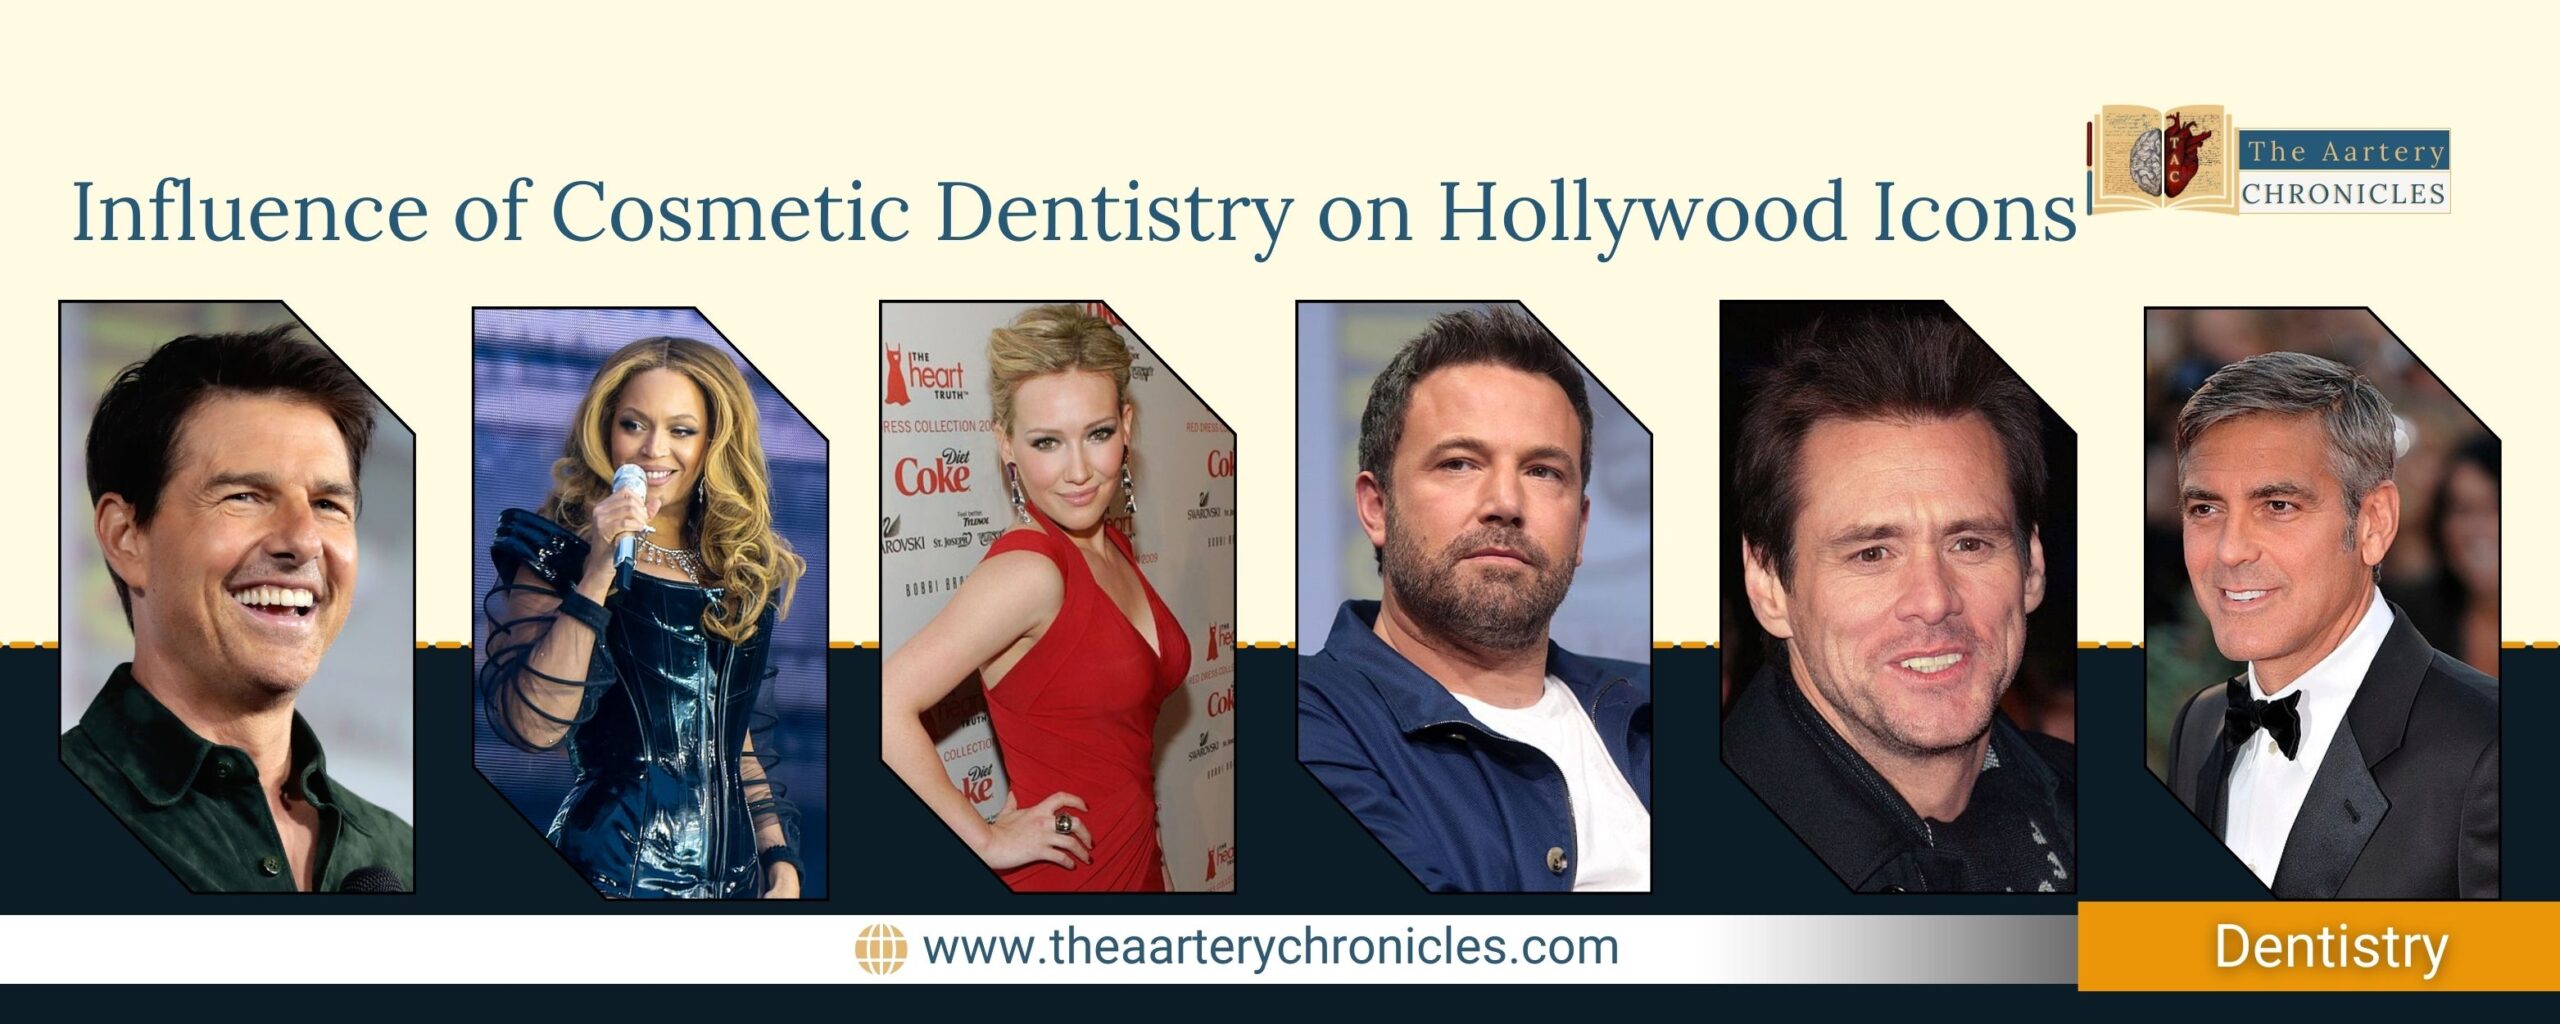 cosmetic-dentistry-the-aaartery-chronicles-tac